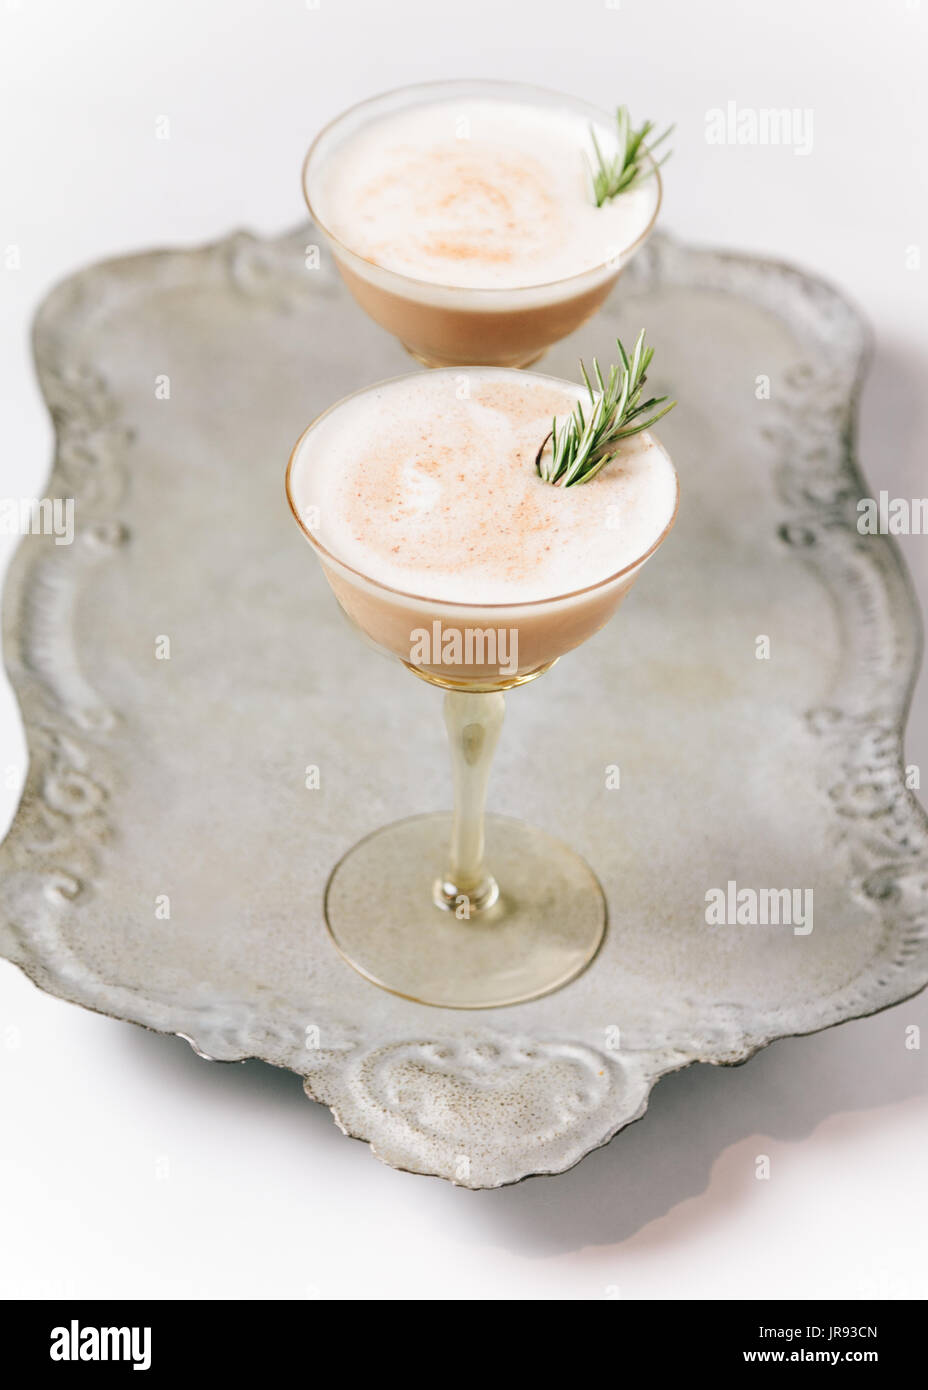 Chocolate creamy cocktail on a vintage tray Stock Photo